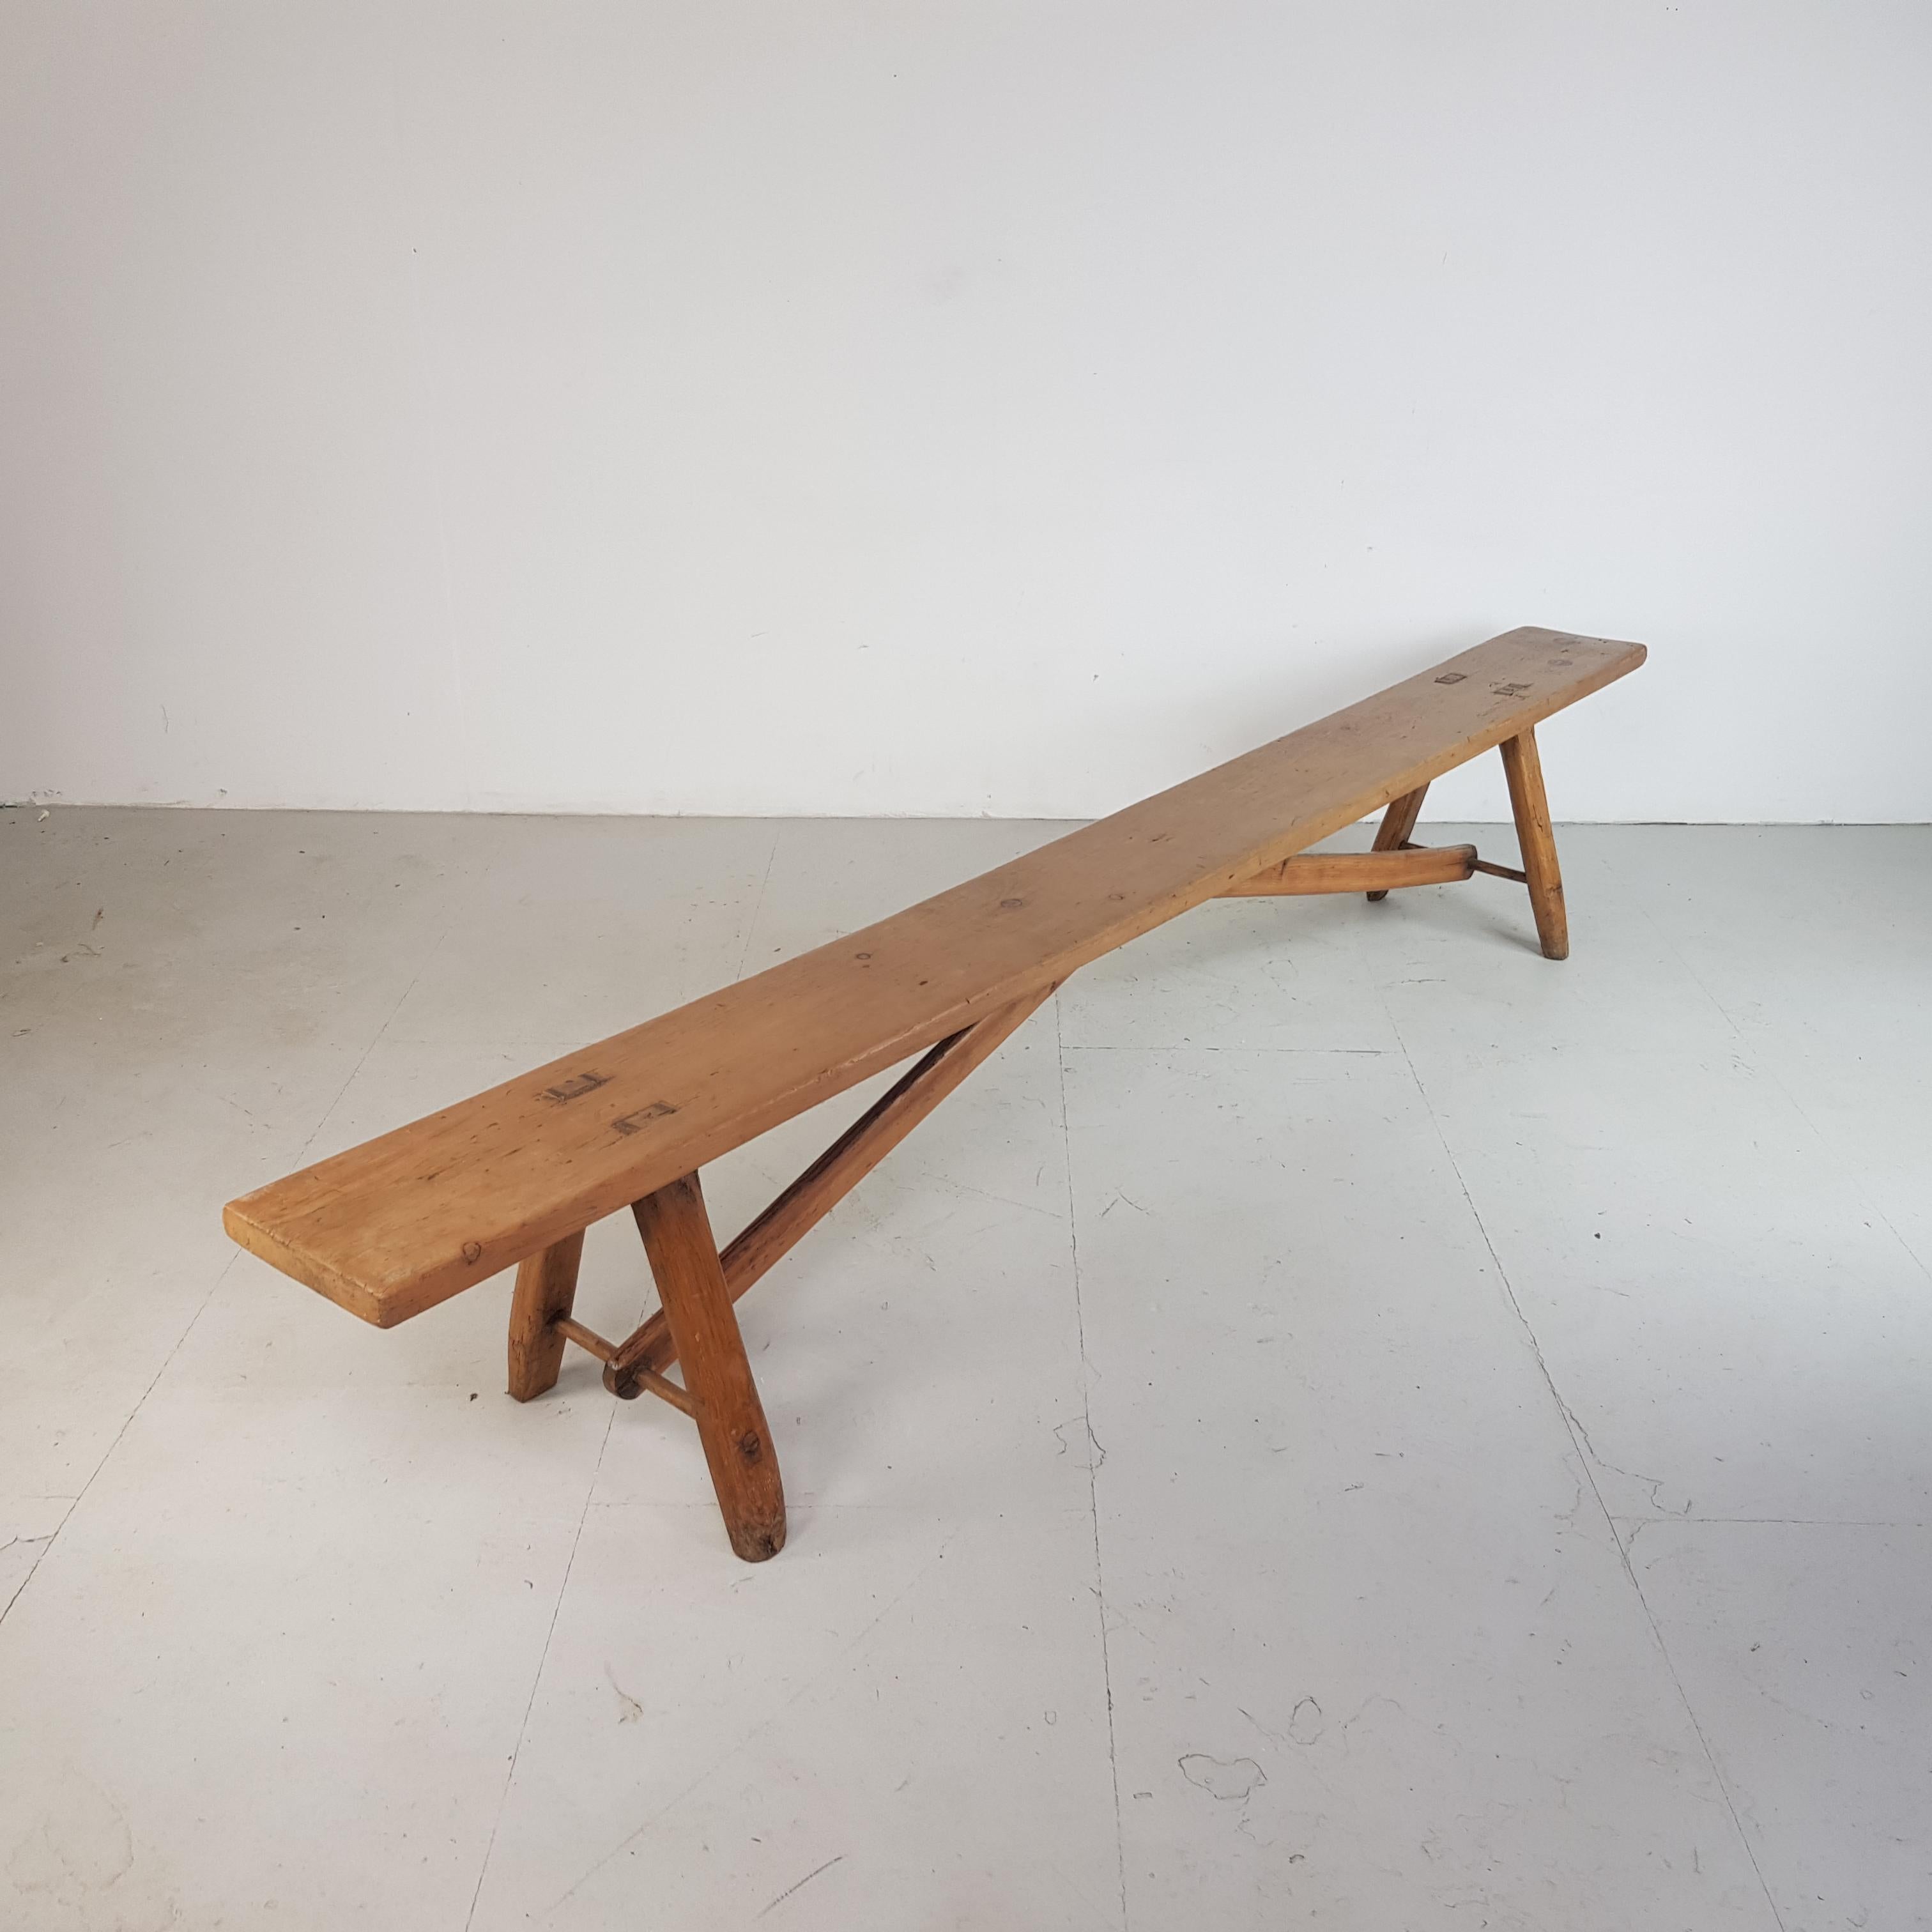 Really lovely 19th century primitive fruitwood bench. Very long rectangular seat raised on staked legs and diagonal stretchers.

Approximate dimensions:

Width: 306cm

Height: 50cm

Depth: 46cm

Seat depth: 28cm

A great piece of